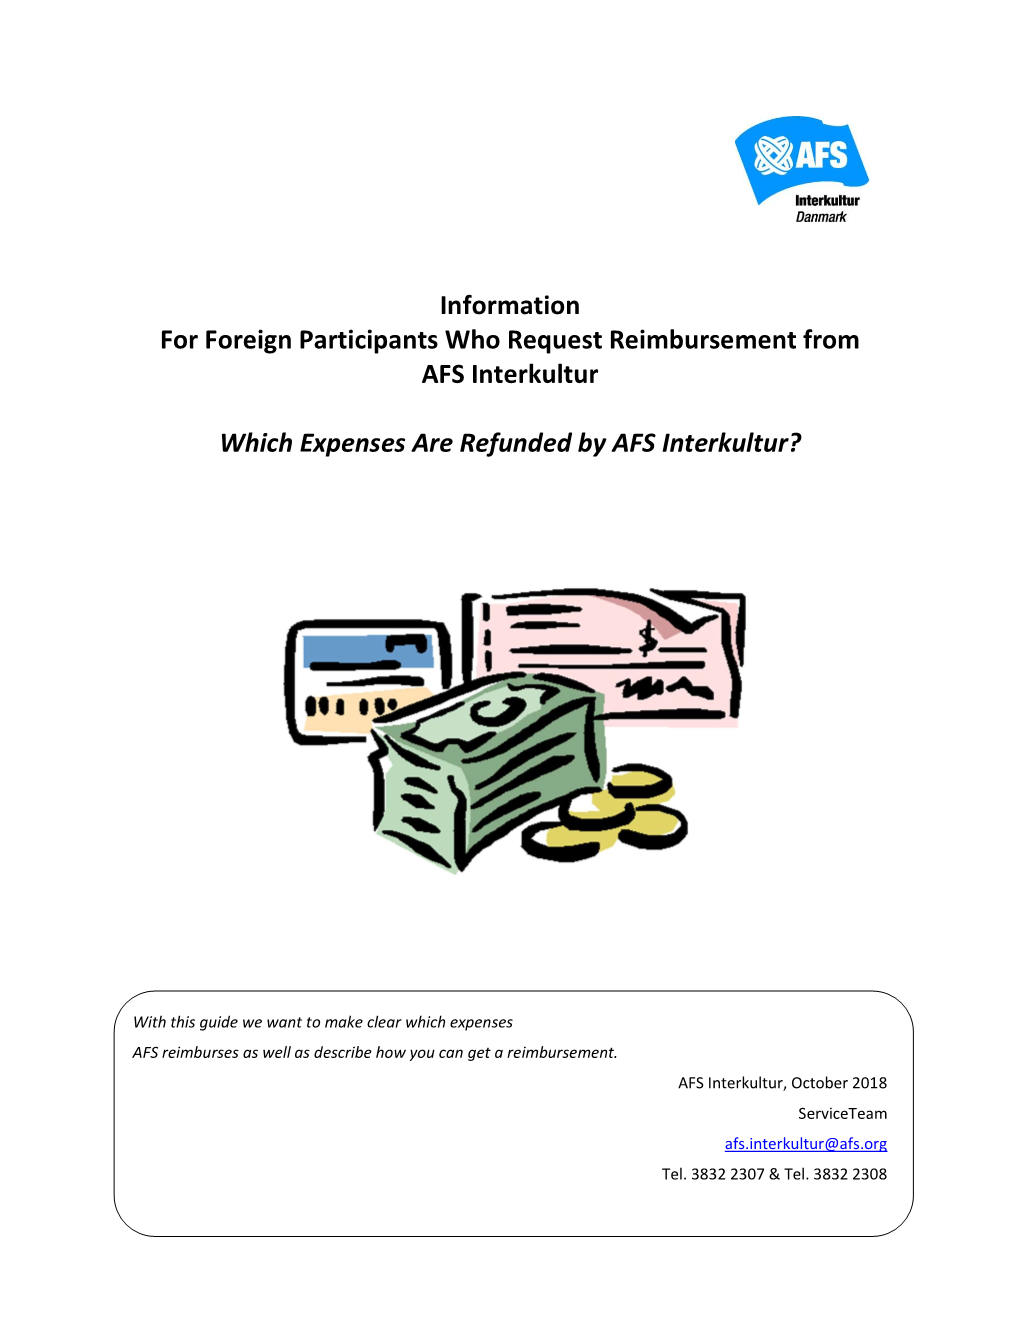 Information for Foreign Participants Who Request Reimbursement from AFS Interkultur Which Expenses Are Refunded by AFS Interkul